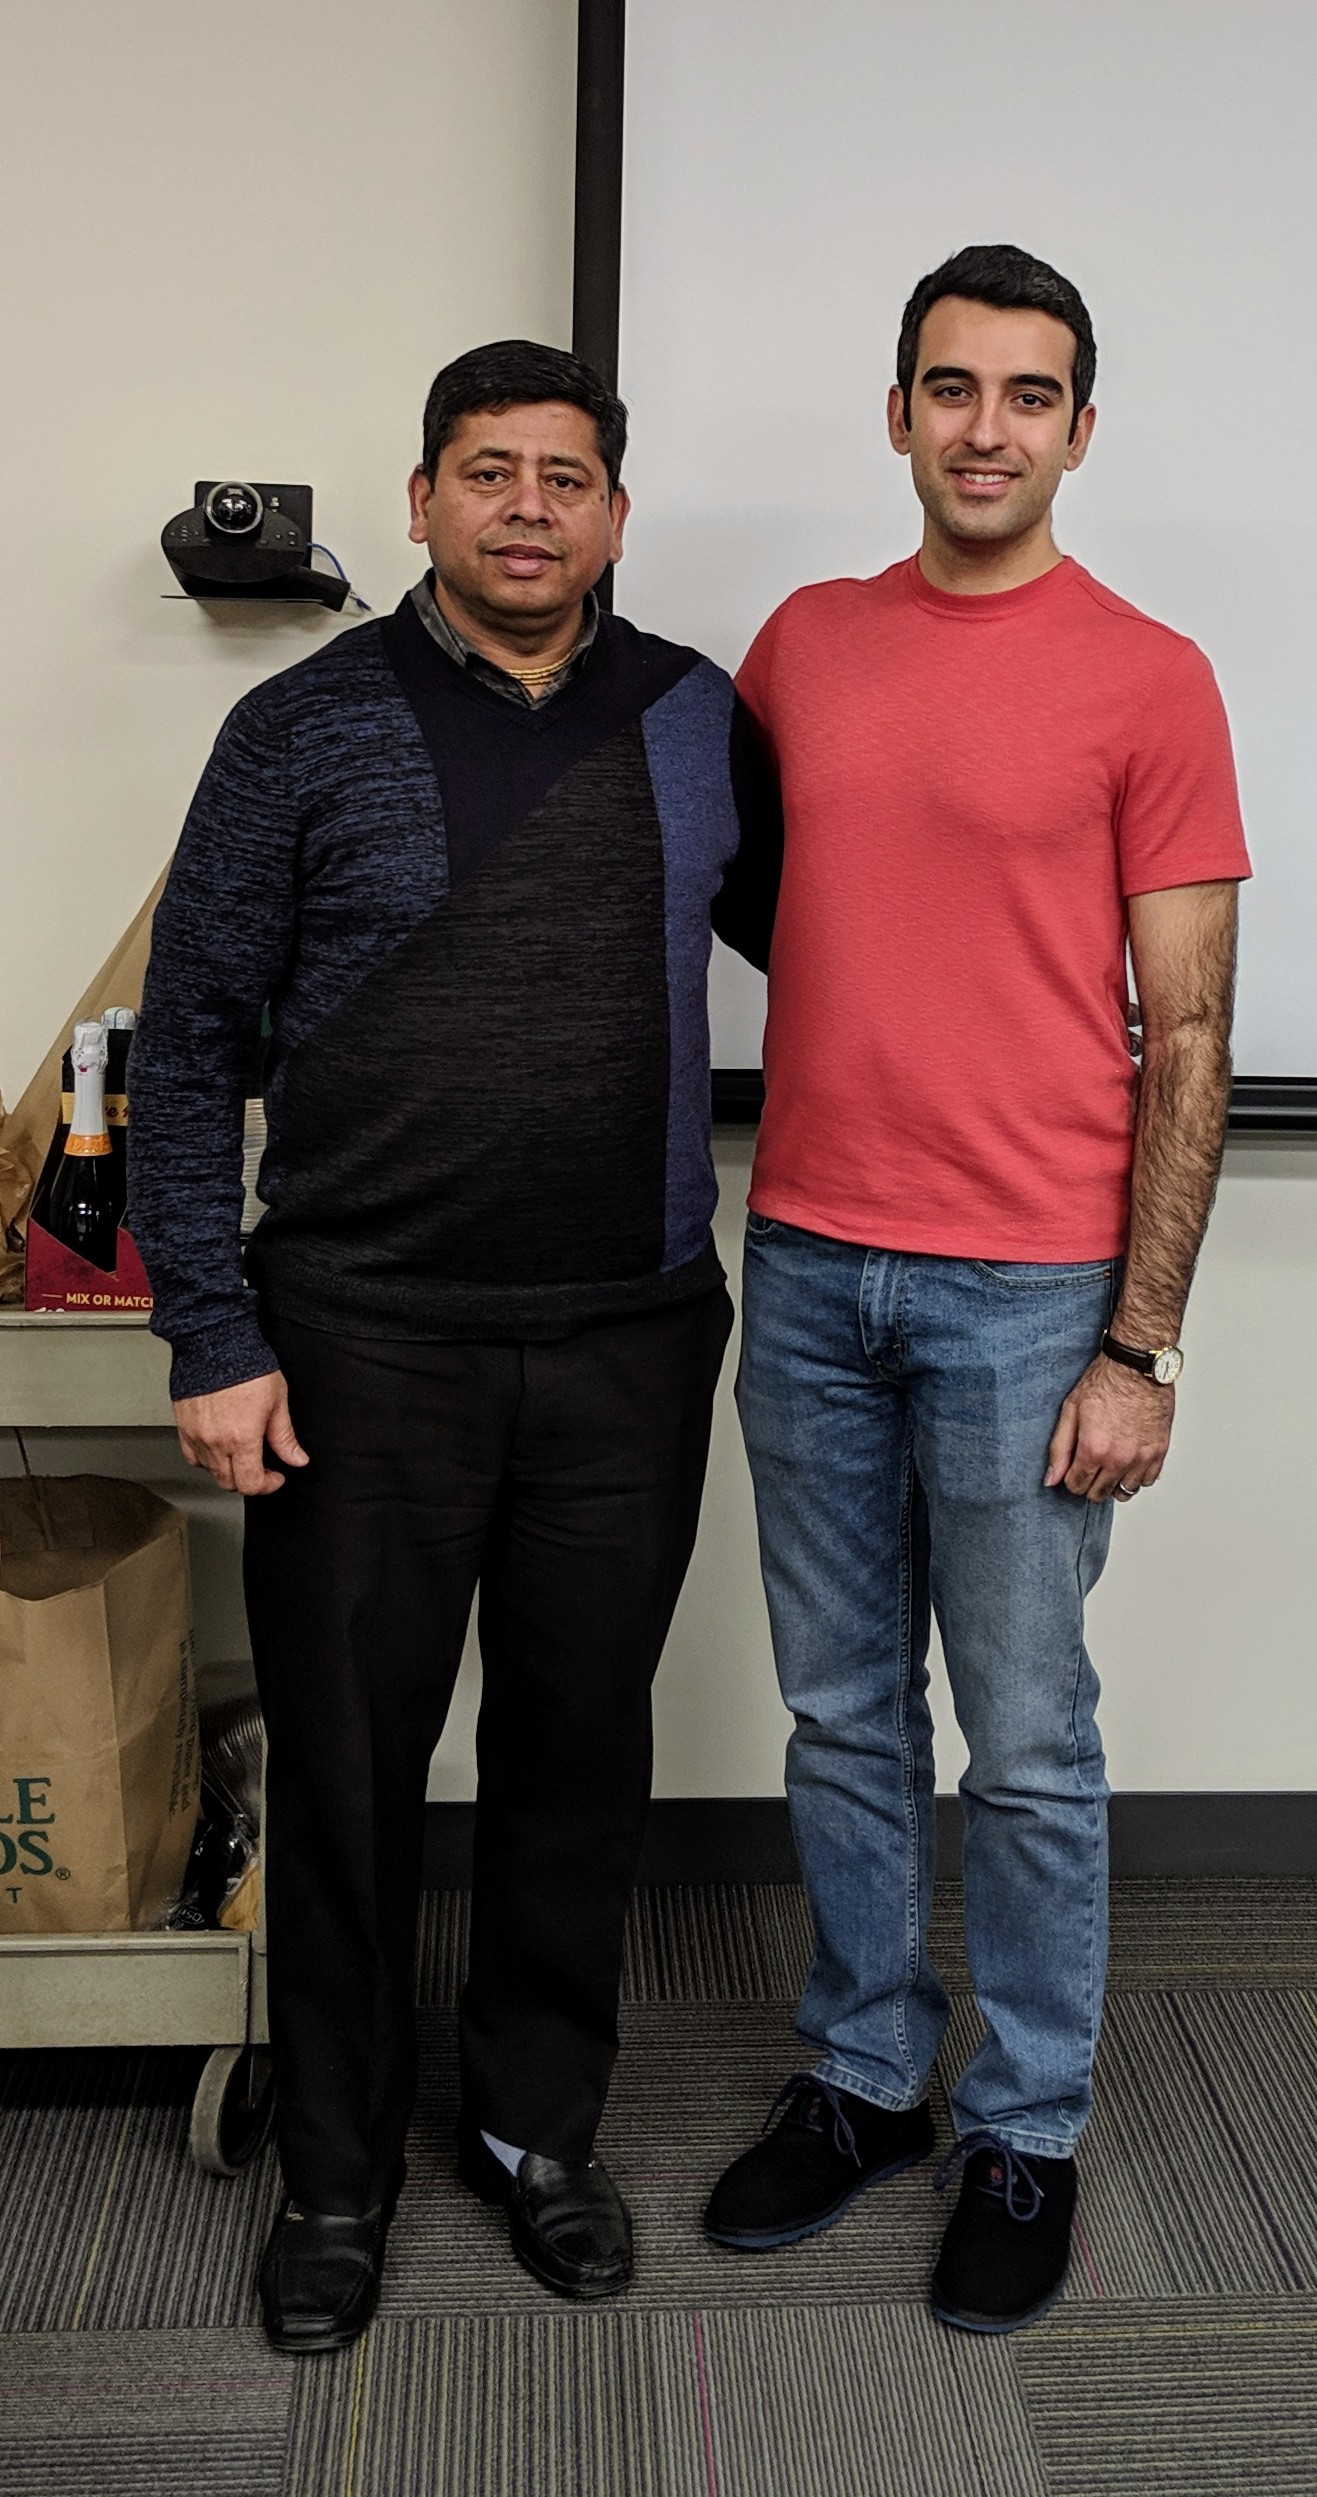 Dr. Yasaei takes one last photo with his mentor, Dr. Gajendra Shekhawat.